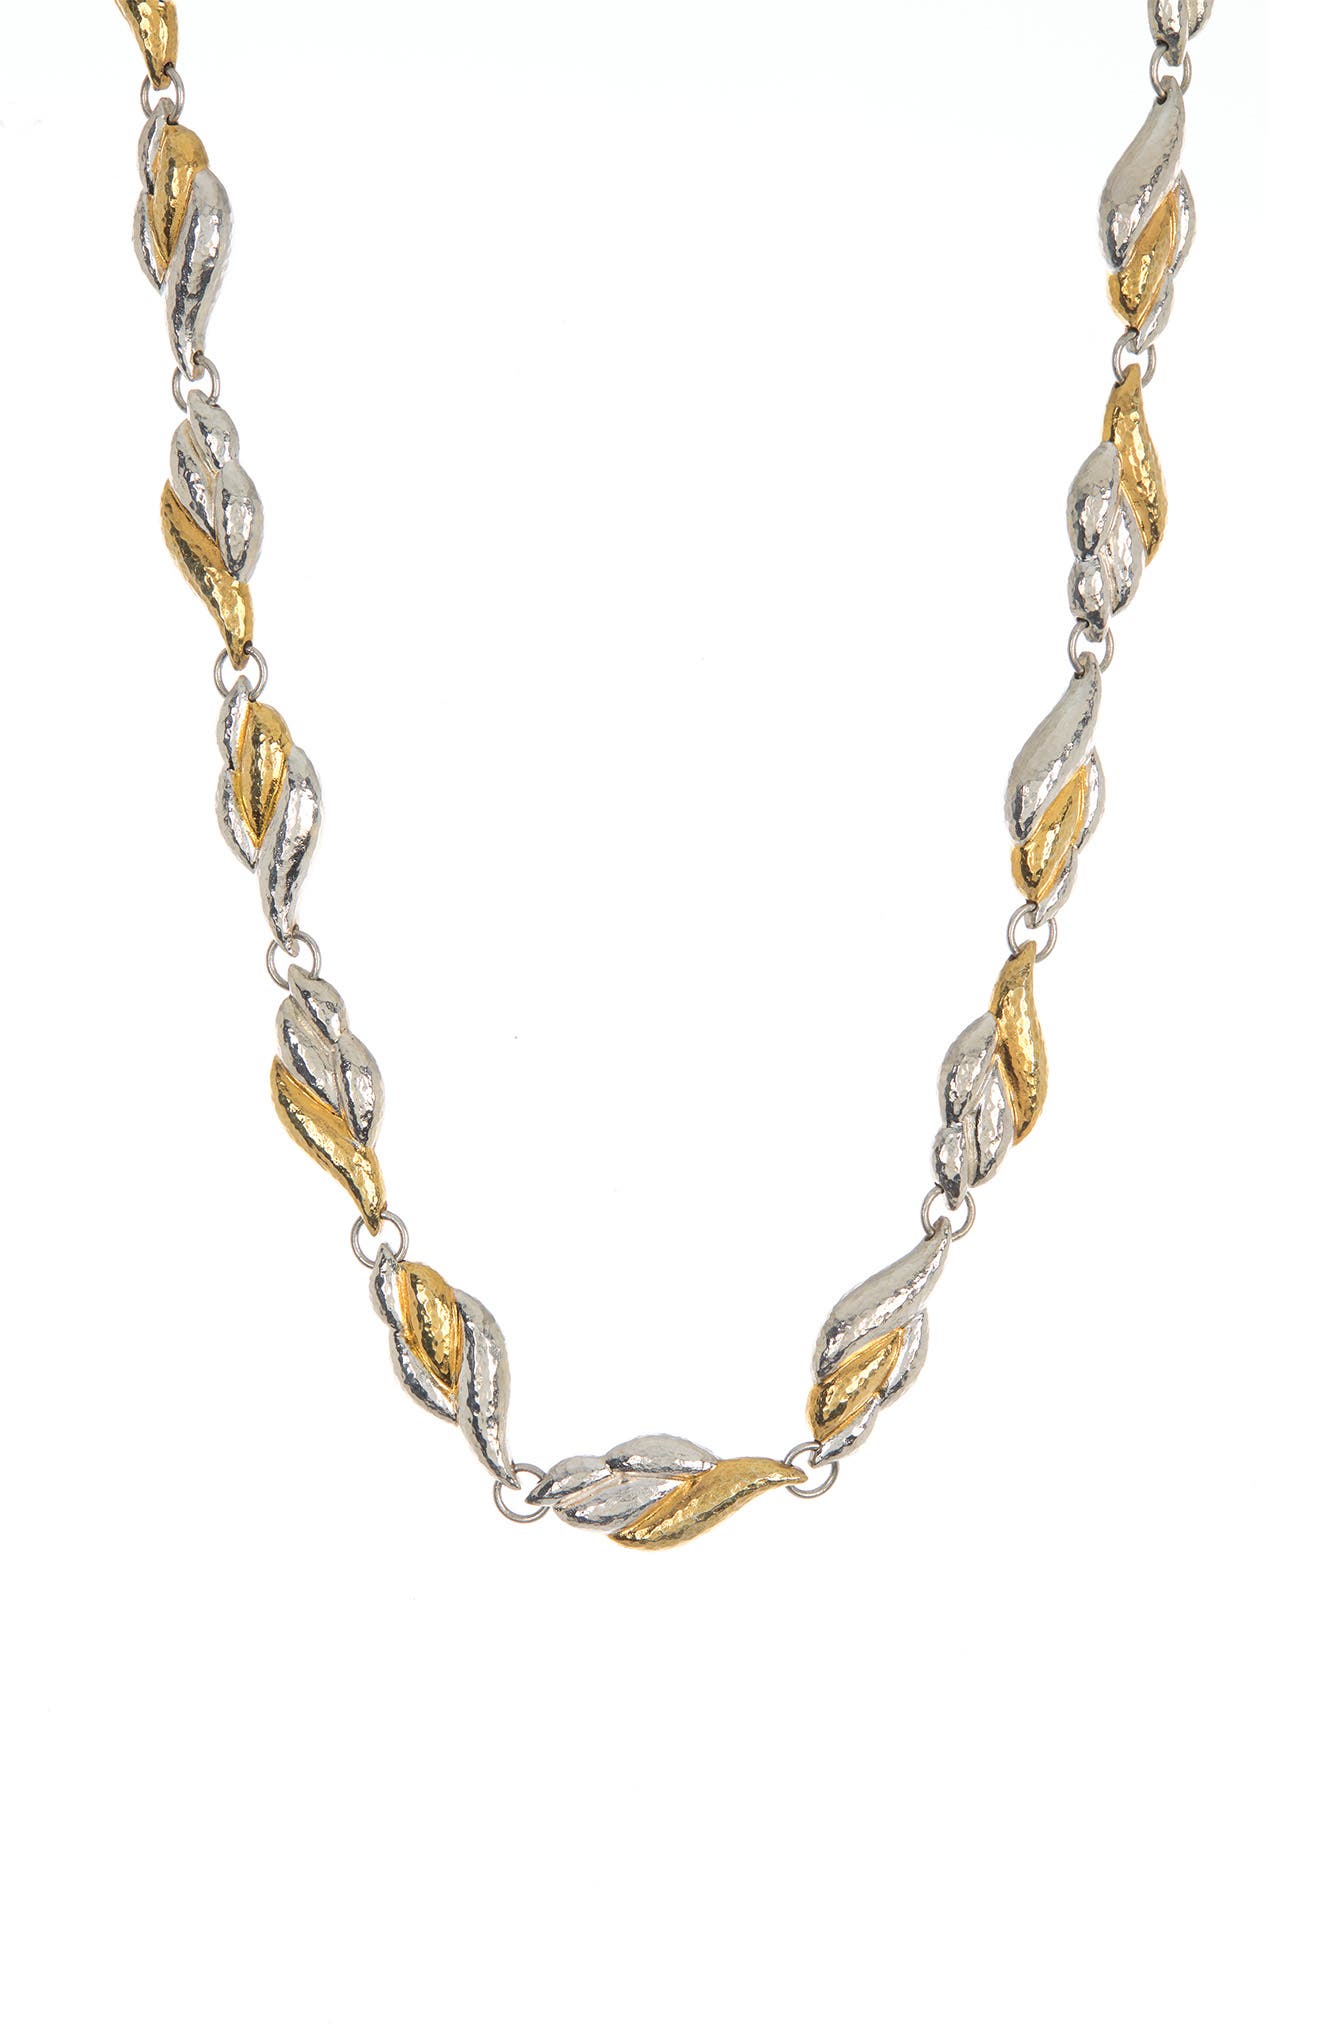 Gurhan Callah 24k Gold Plated Sterling Silver Hammered Twist Station Collar Necklace